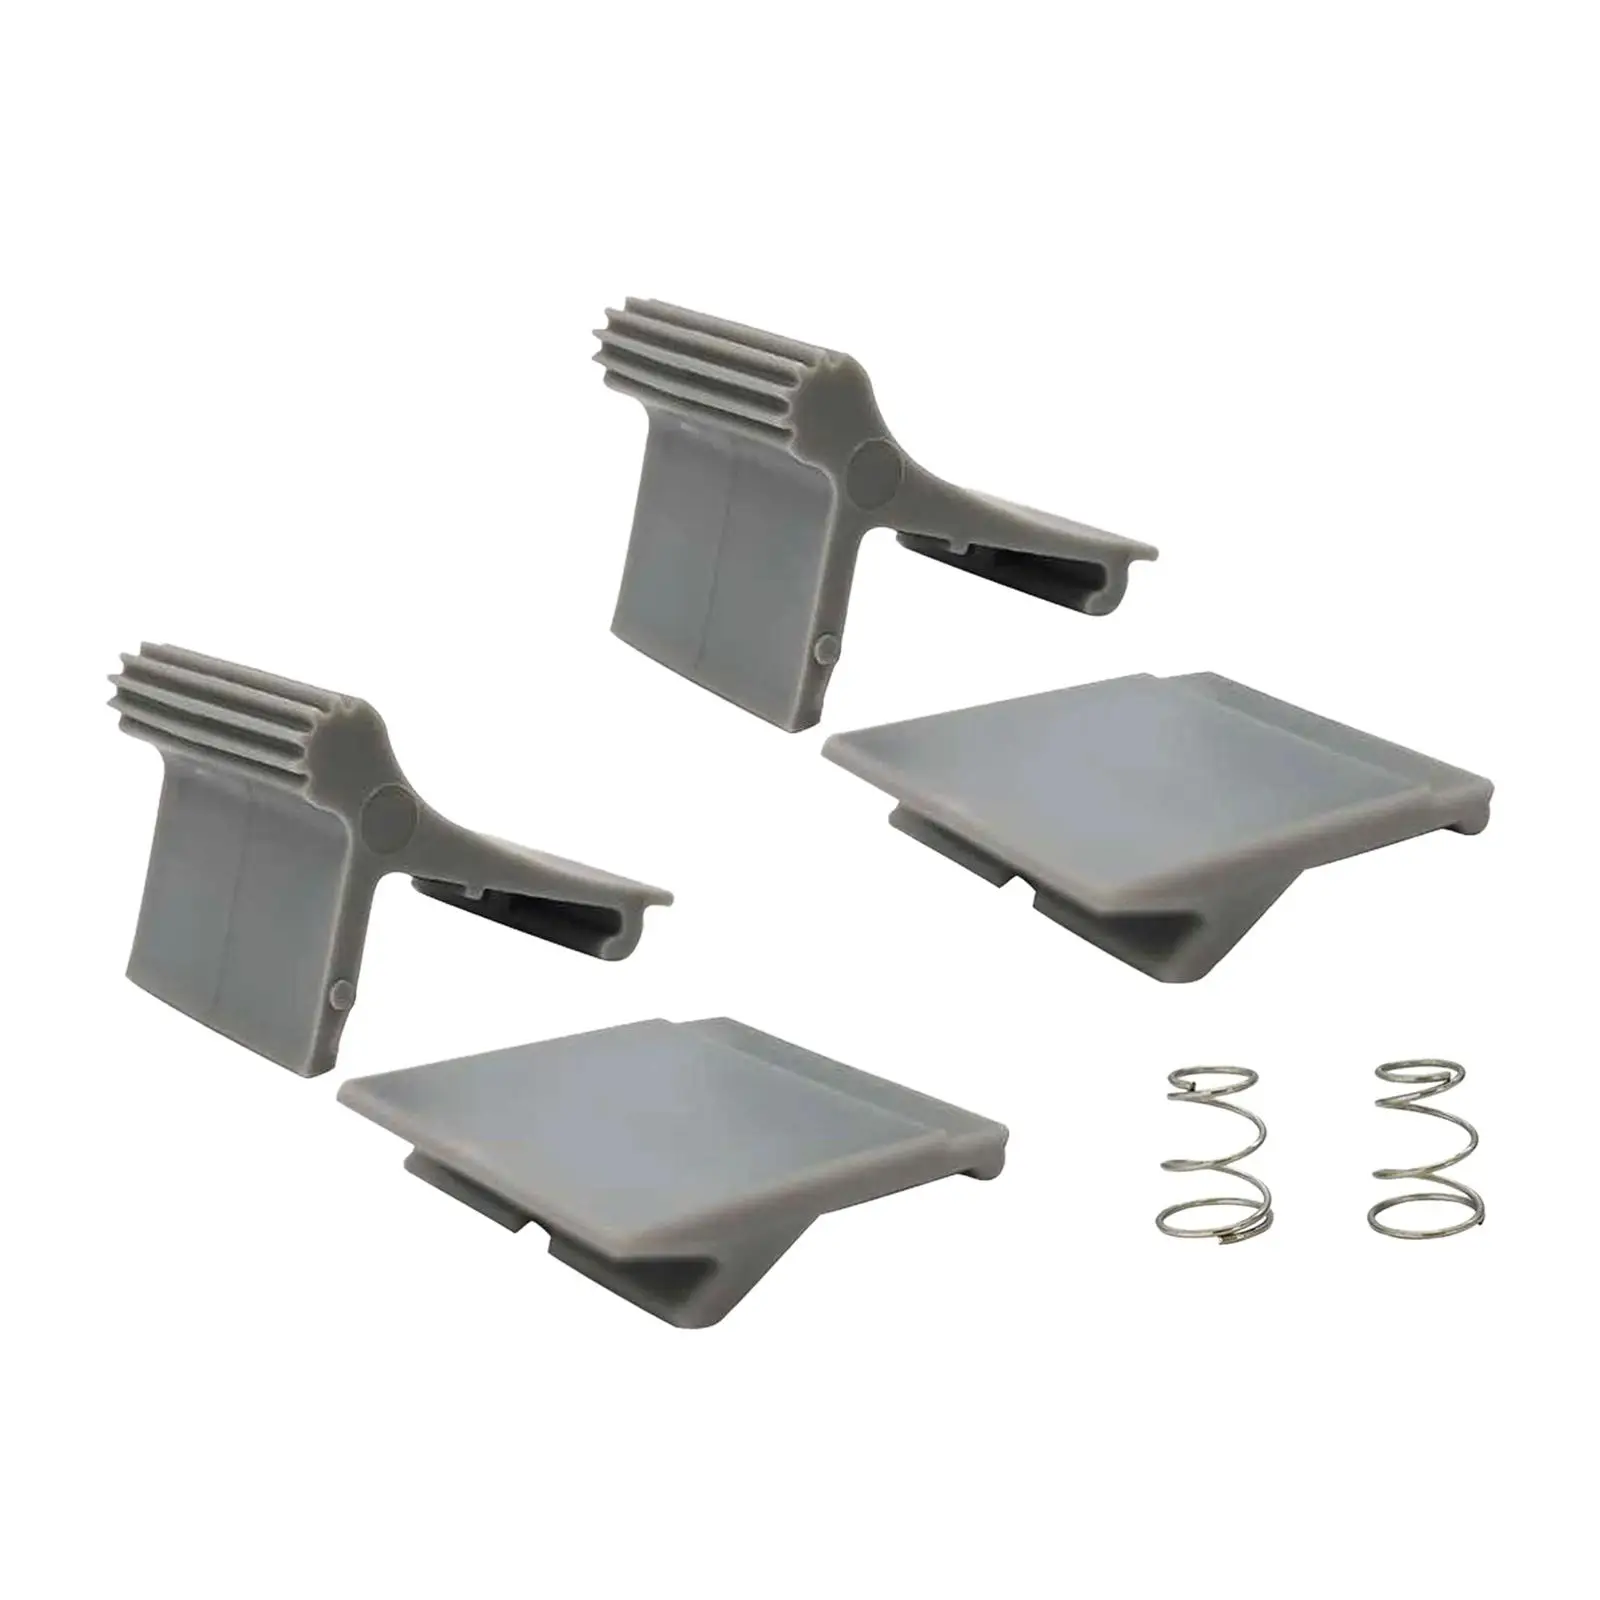 Awning Arm Slider Catch Set Spare Parts Accessory for Camper Motorhome